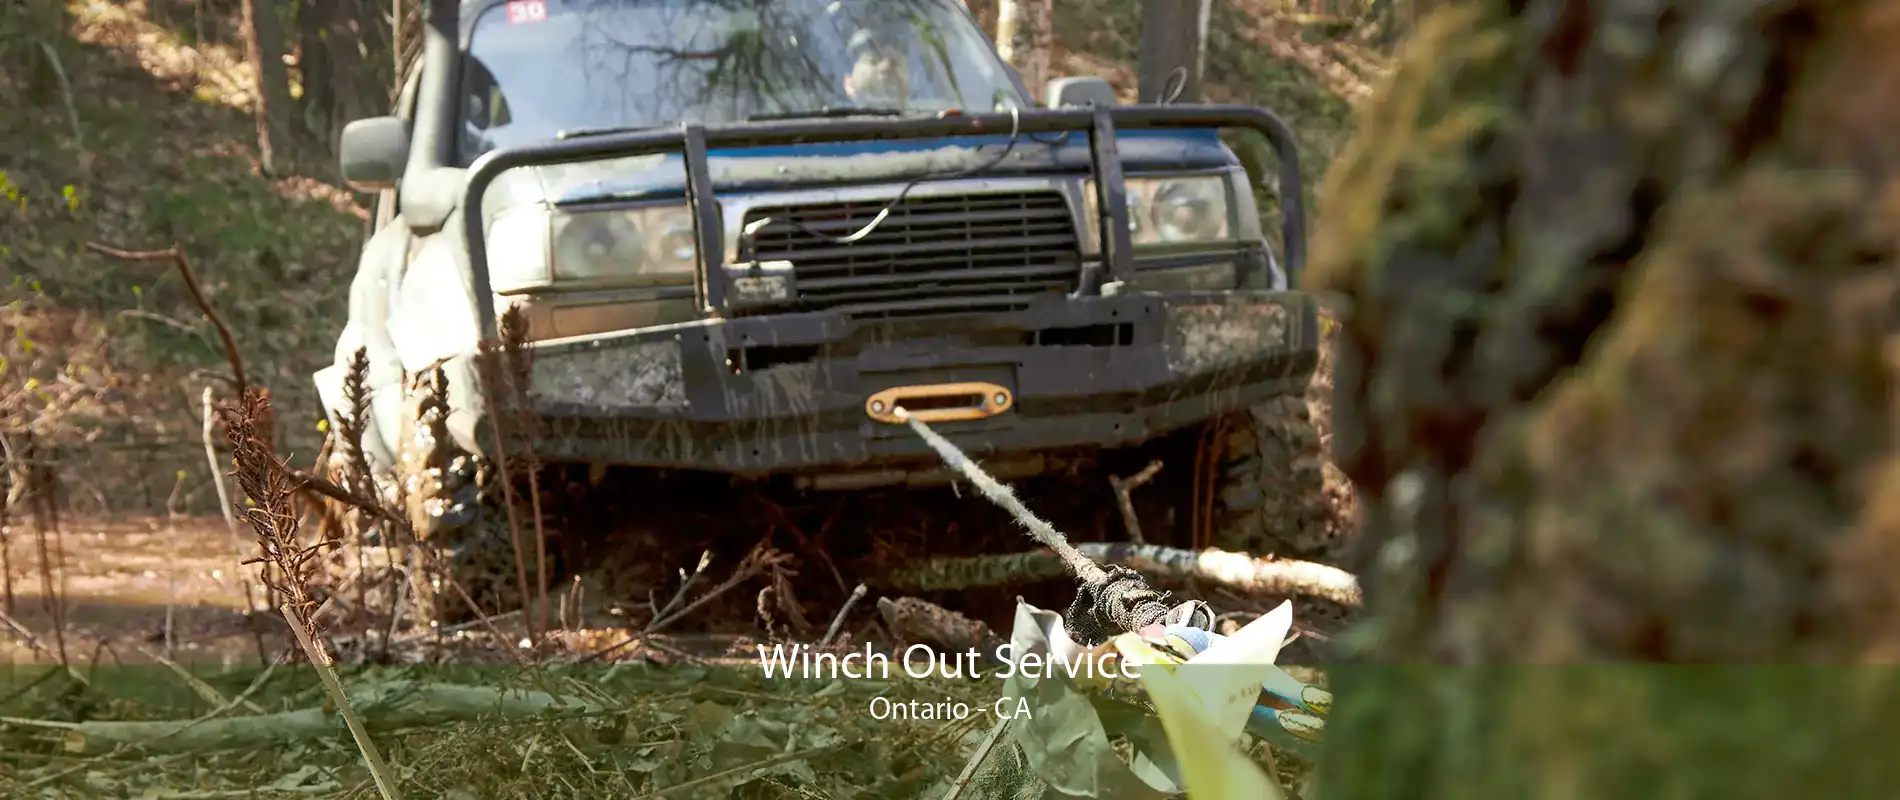 Winch Out Service Ontario - CA